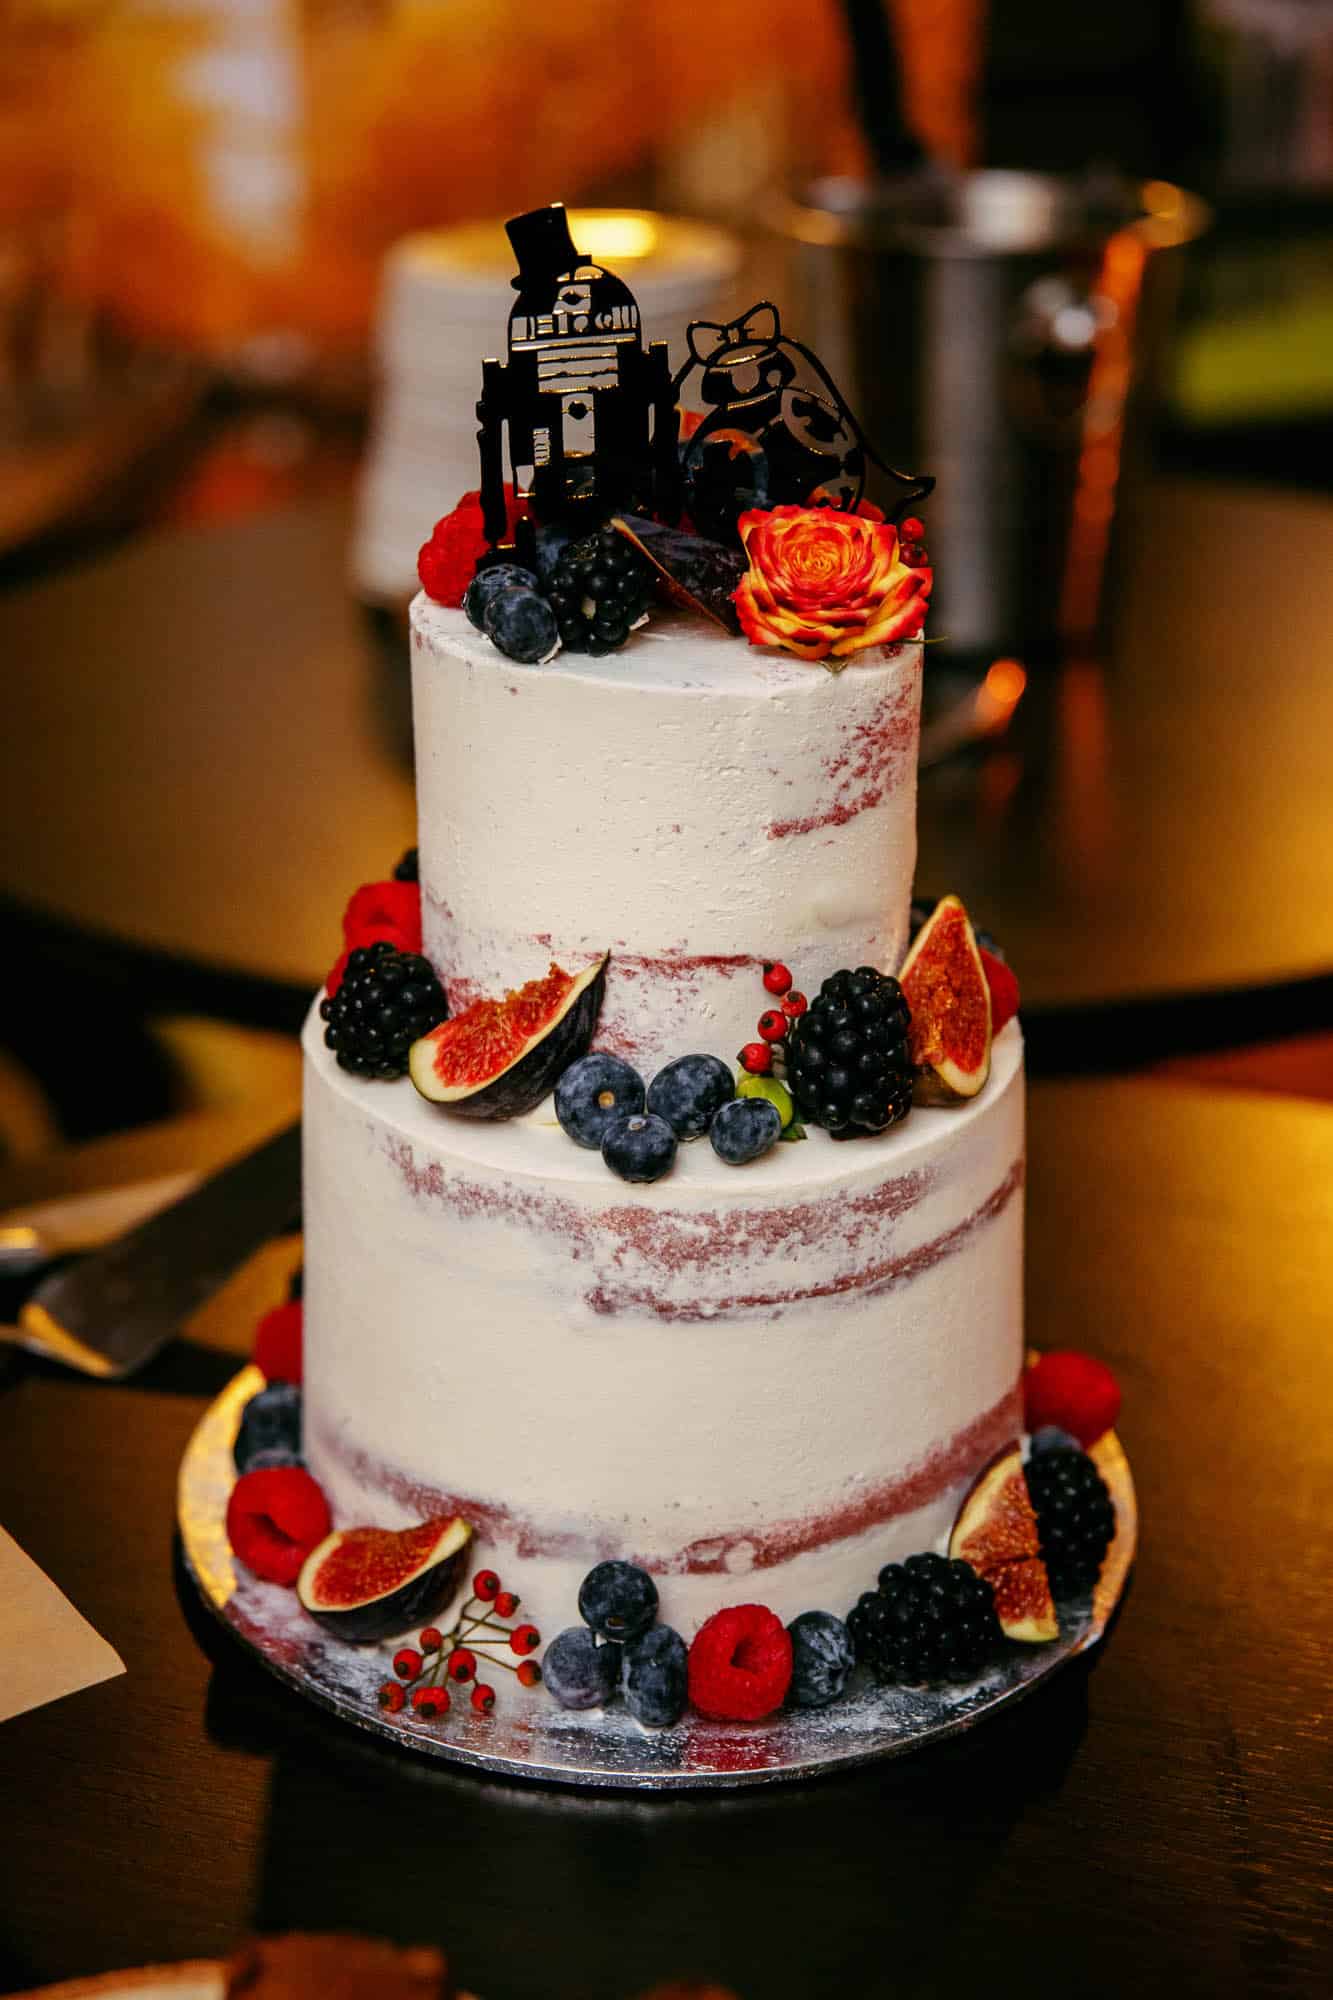 A wedding cake with berries and fruit on top.